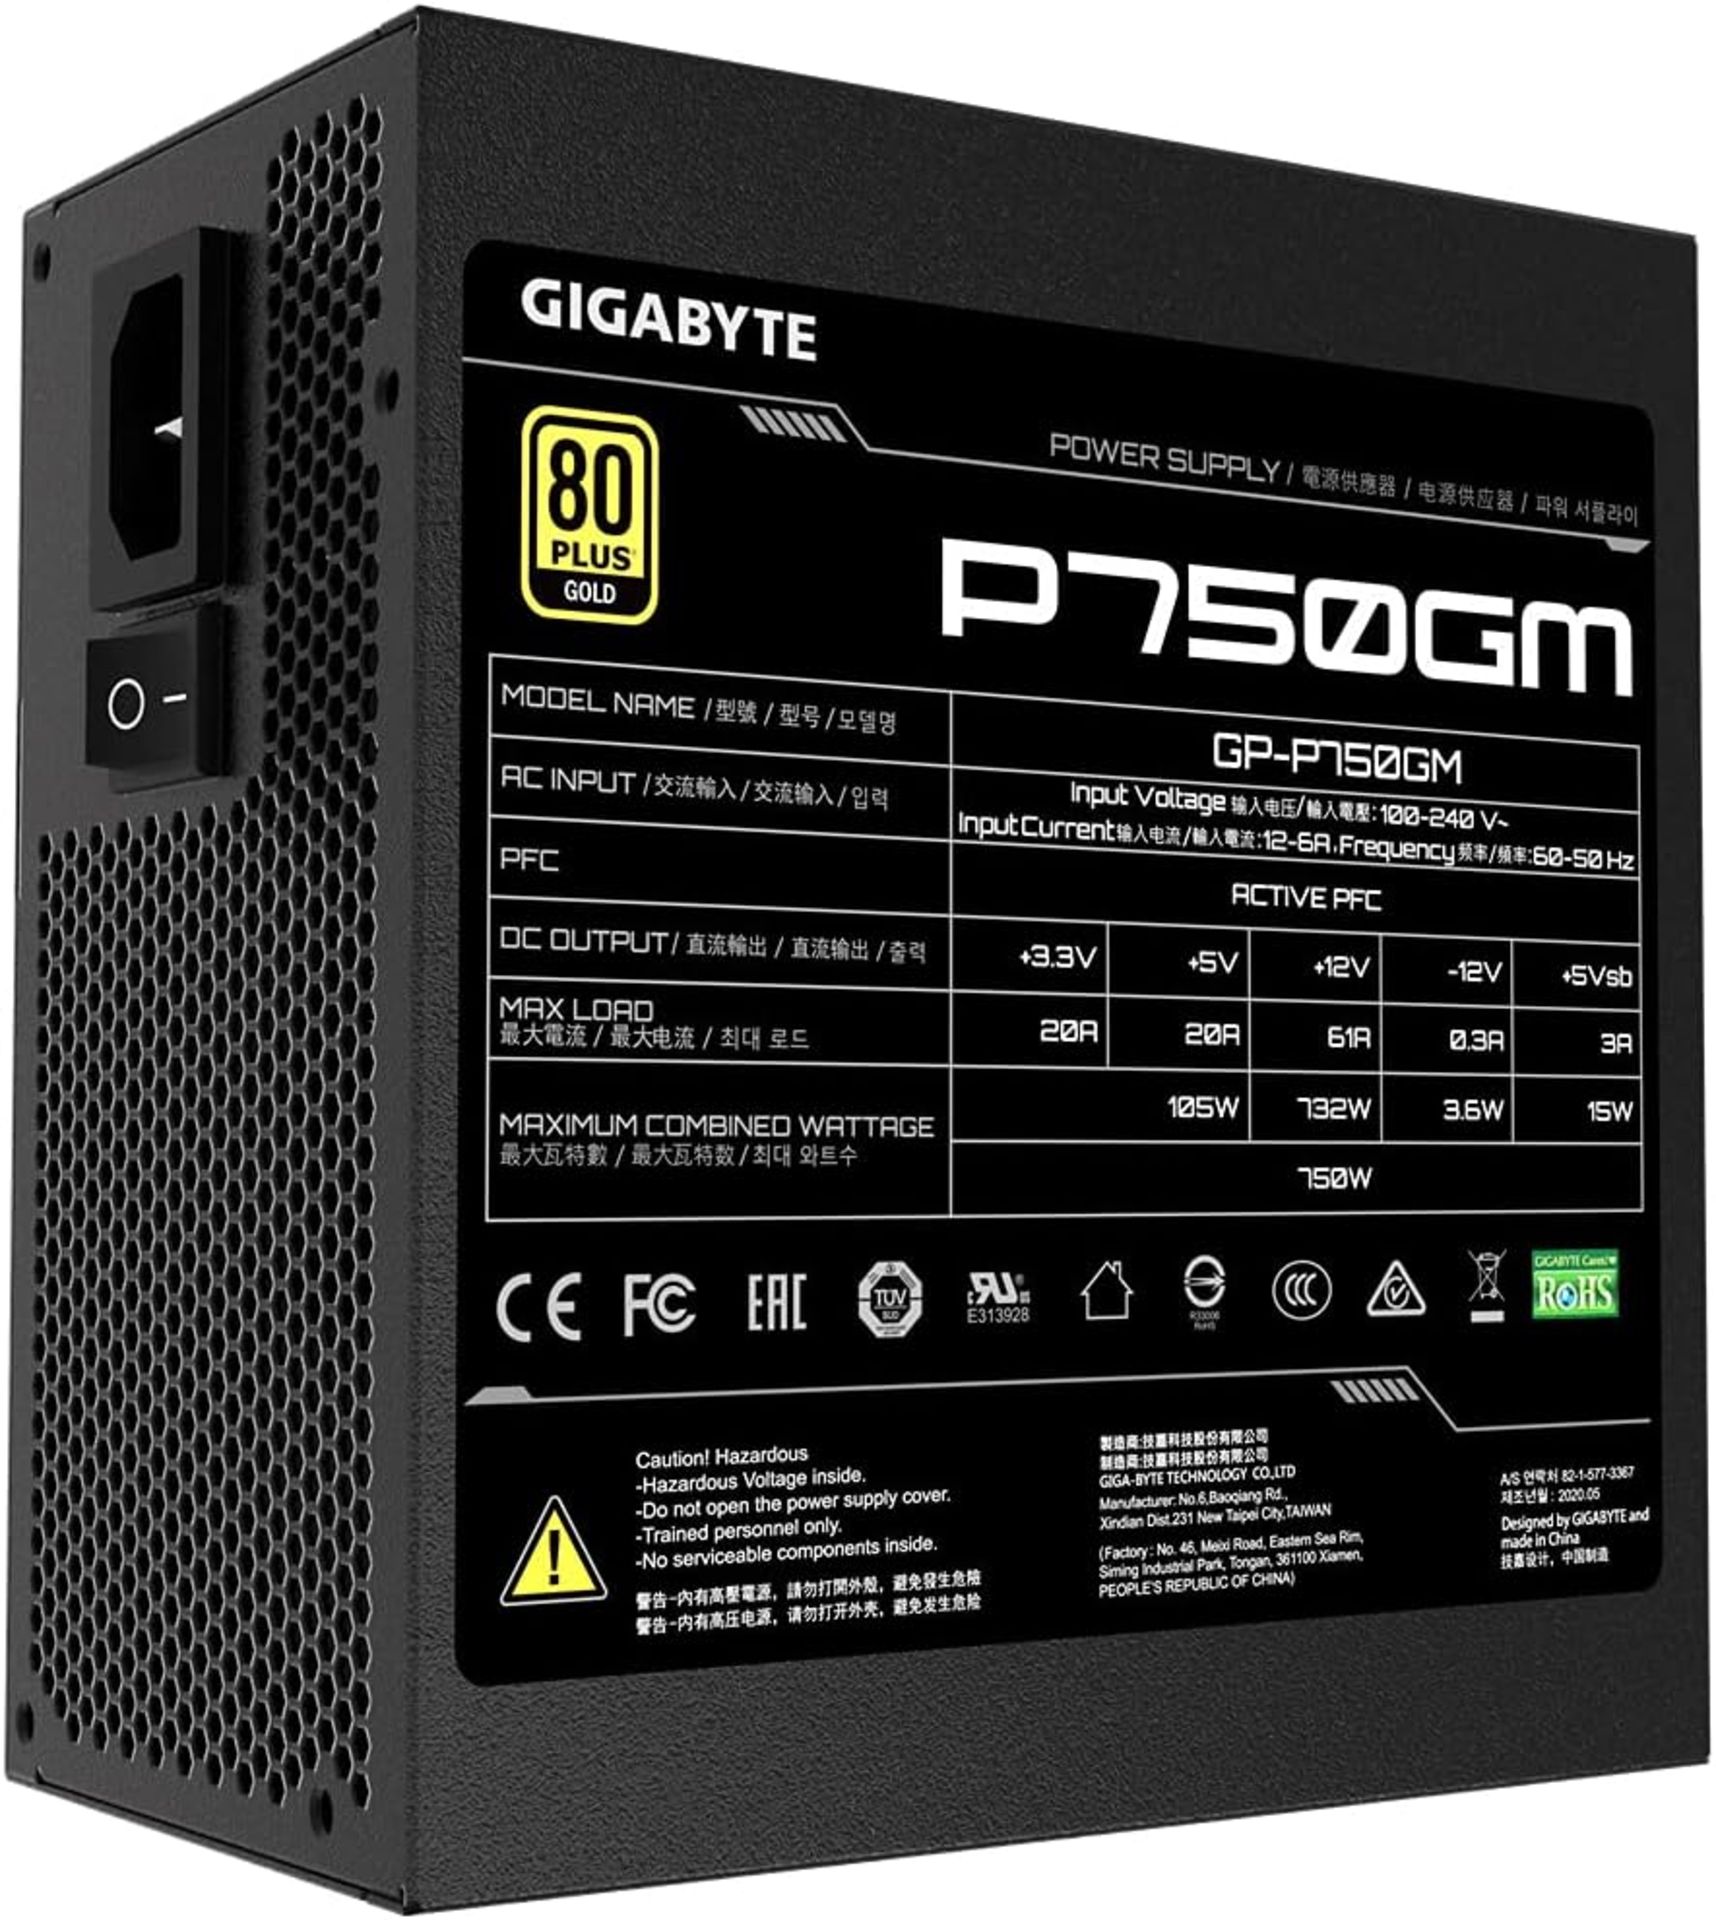 BRAND NEW FACTORY SEALED GIGABYTE P750GM 750w 80 Plus Gold Fully Modular Power Supply. RRP £84.99. - Image 2 of 6